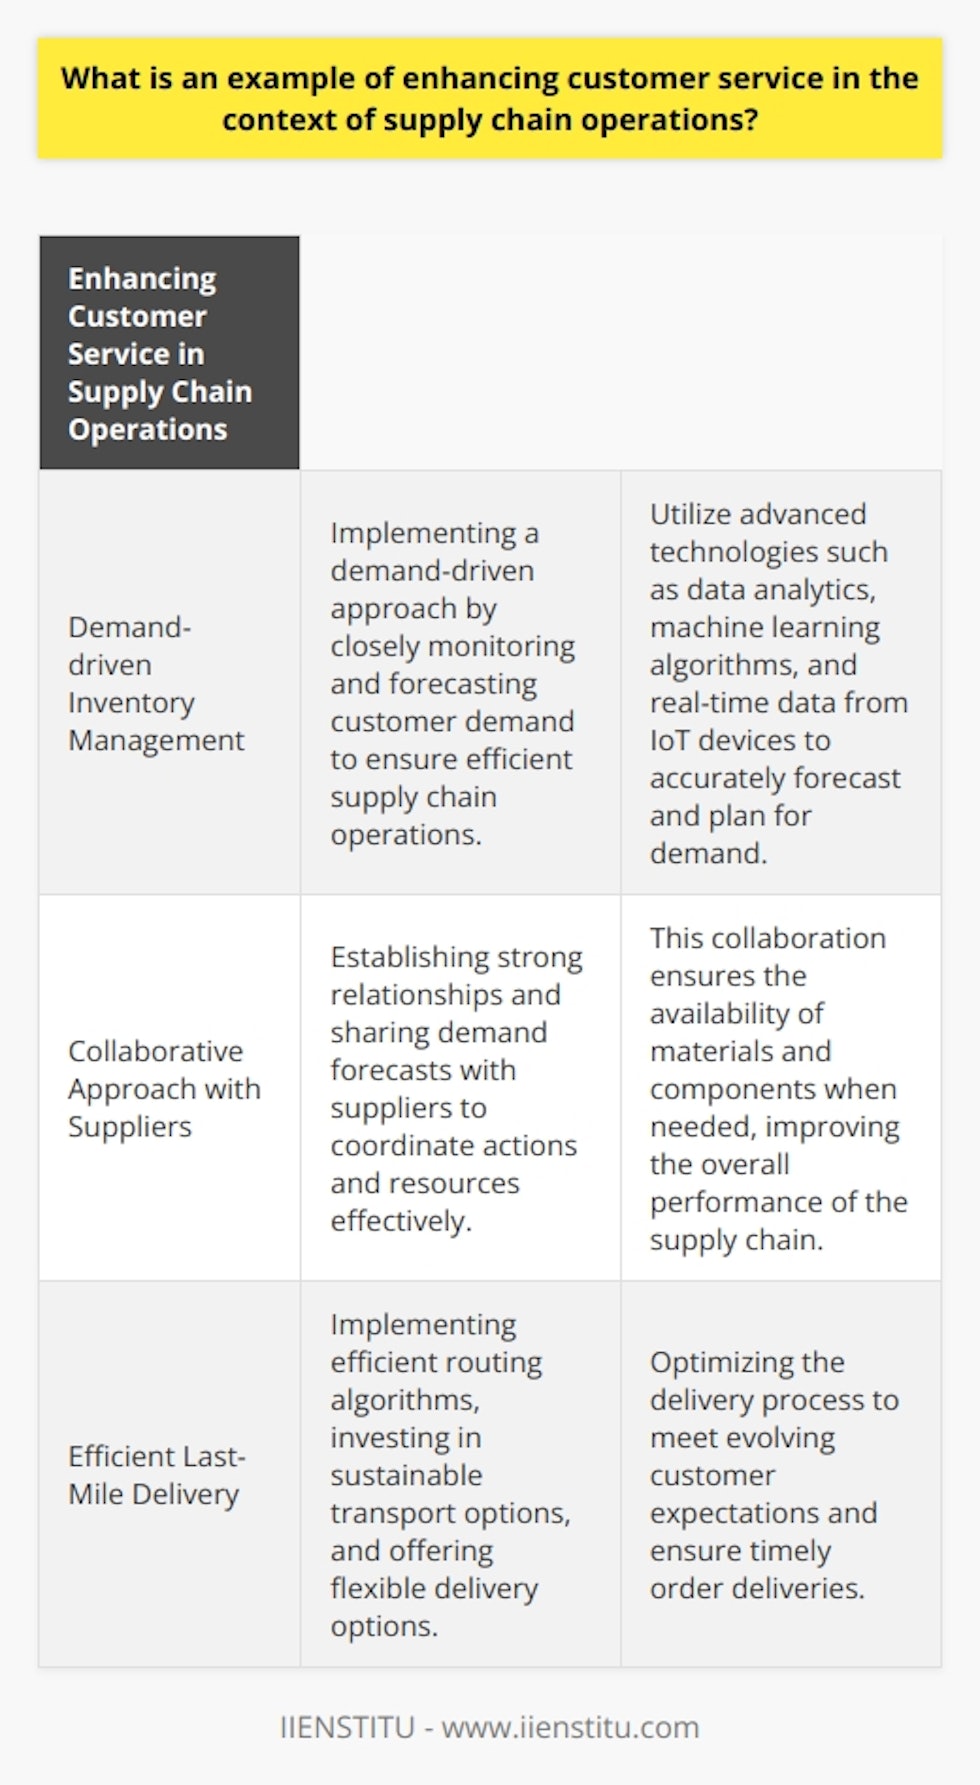 Enhancing customer service in the context of supply chain operations is crucial for businesses to remain competitive in today's market. One example of how companies can achieve this is by implementing a demand-driven approach to inventory management.Demand-driven inventory management involves closely monitoring and forecasting customer demand to ensure that the supply chain operates efficiently. By accurately predicting customer demand, companies can reduce lead times and ensure that customers receive their orders promptly, therefore improving their overall purchasing experience.To implement demand-driven inventory management, companies should leverage advanced technologies such as data analytics, machine learning algorithms, and real-time data gathered from IoT devices. These tools enable organizations to accurately forecast and plan for demand, allowing them to optimize their production schedules and respond quickly to changes in demand patterns.In addition to advanced technologies, a collaborative approach with suppliers is essential for enhancing customer service in supply chain operations. By establishing strong relationships and sharing demand forecasts with suppliers, both parties can coordinate their actions and resources effectively. This collaboration ensures the availability of materials and components when needed, ultimately improving the overall performance of the end-to-end supply chain.Efficient last-mile delivery is also a critical aspect of enhancing customer service in supply chain operations. Companies can achieve this by implementing efficient routing algorithms, investing in sustainable transport options, and offering flexible delivery options. By optimizing the delivery process, companies can meet the evolving expectations of customers and ensure that orders are delivered in a timely manner.In conclusion, enhancing customer service in the context of supply chain operations requires a demand-driven and collaborative approach to inventory management. By leveraging advanced technologies, collaborating with suppliers, and optimizing last-mile delivery processes, companies can offer superior customer support and become a reliable partner in their clients' business endeavors.